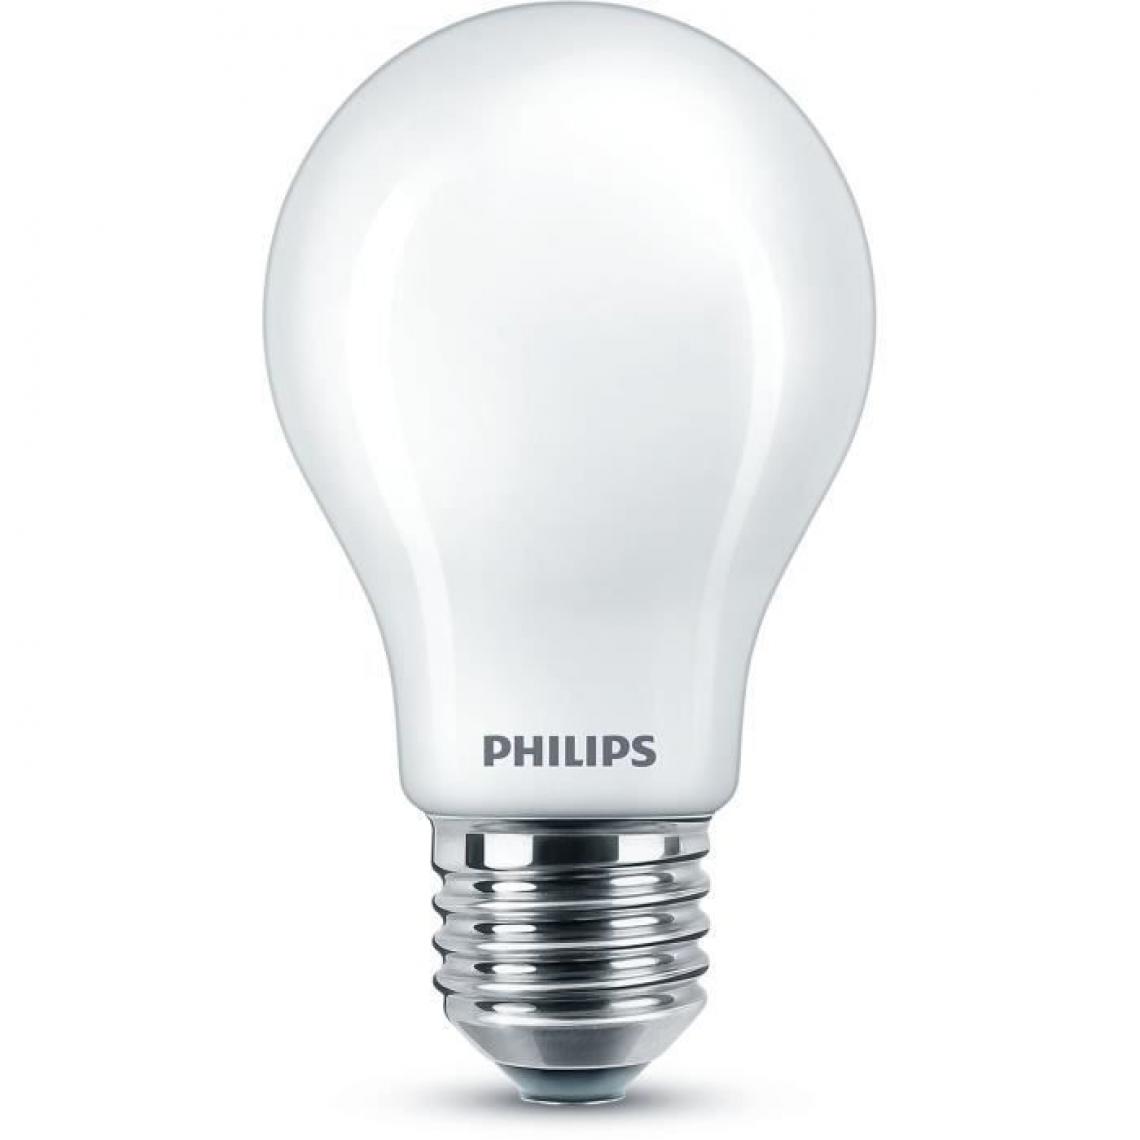 Philips - Philips Ampoule LED Equivalent 40W E27 Blanc chaud Non Dimmable - Ampoules LED